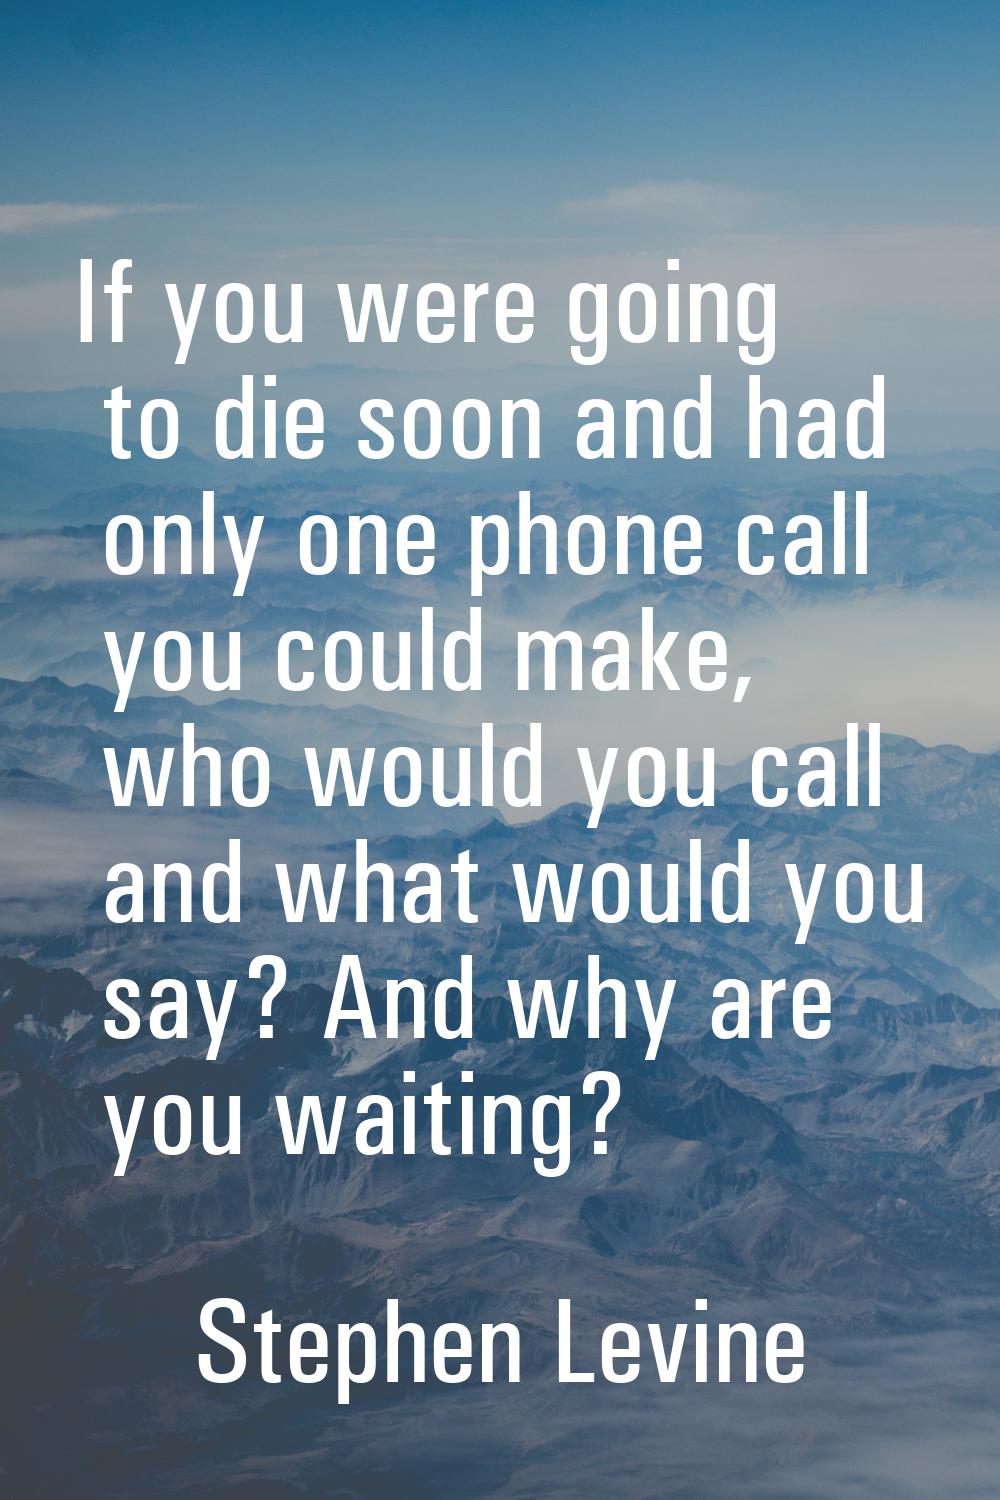 If you were going to die soon and had only one phone call you could make, who would you call and wh